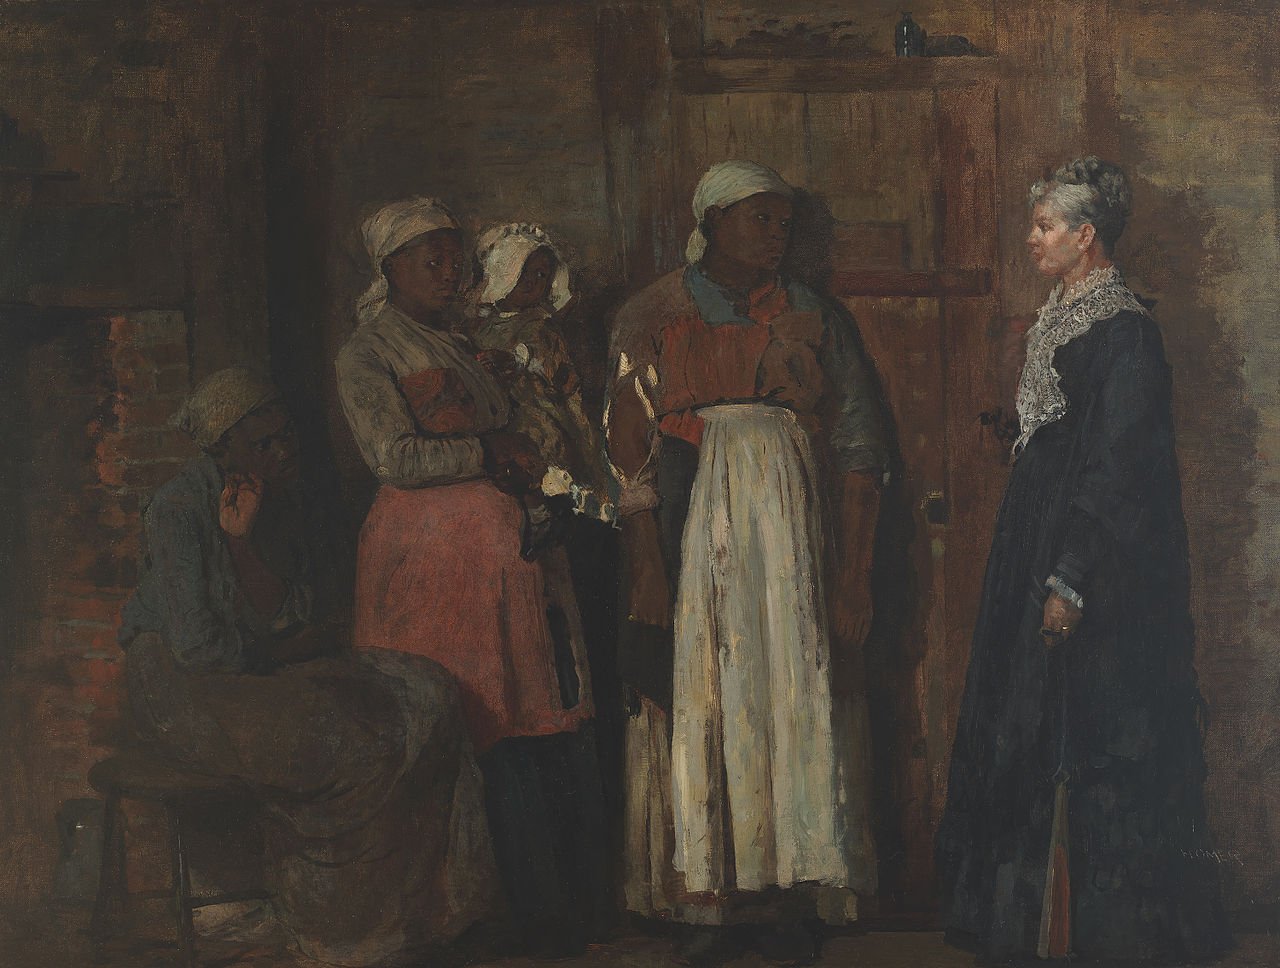 A Visit from the old Mistress by Wilmslow Homer (1876)